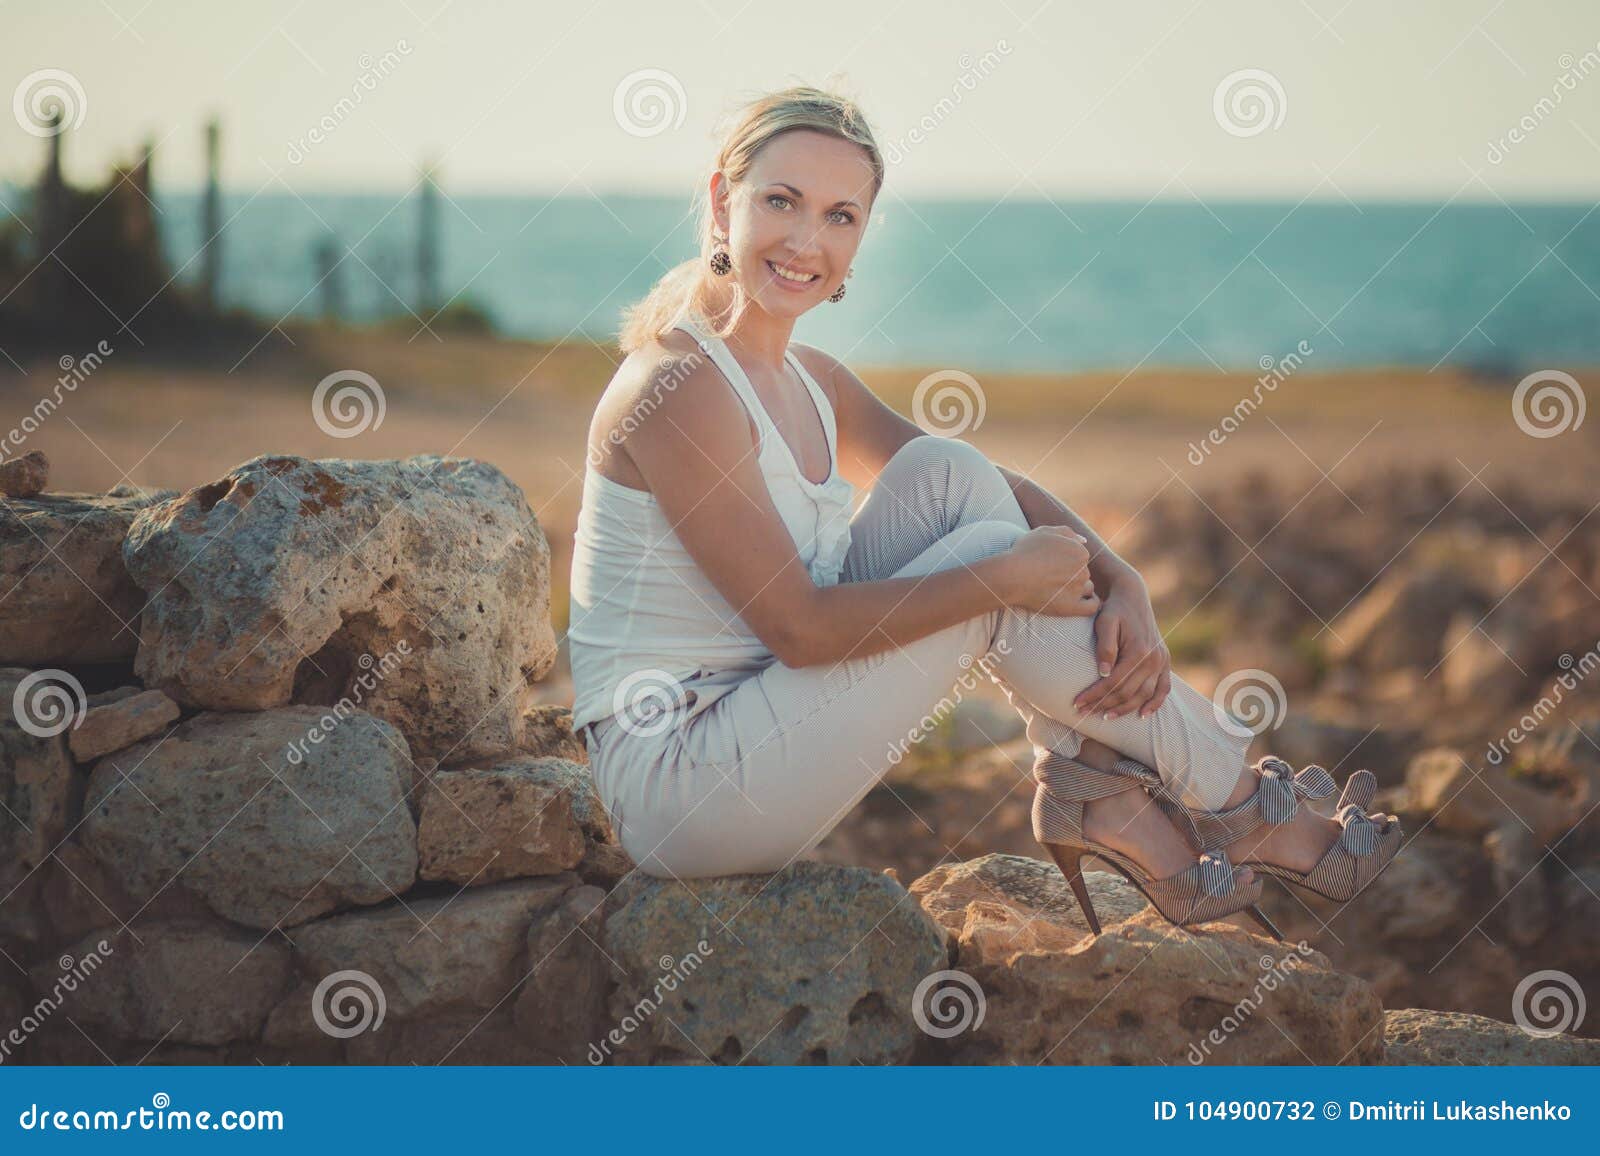 amazing lady blond woman in light white stylish clothes posing on sea side beach air.sparkler girl looking to camera on ancie